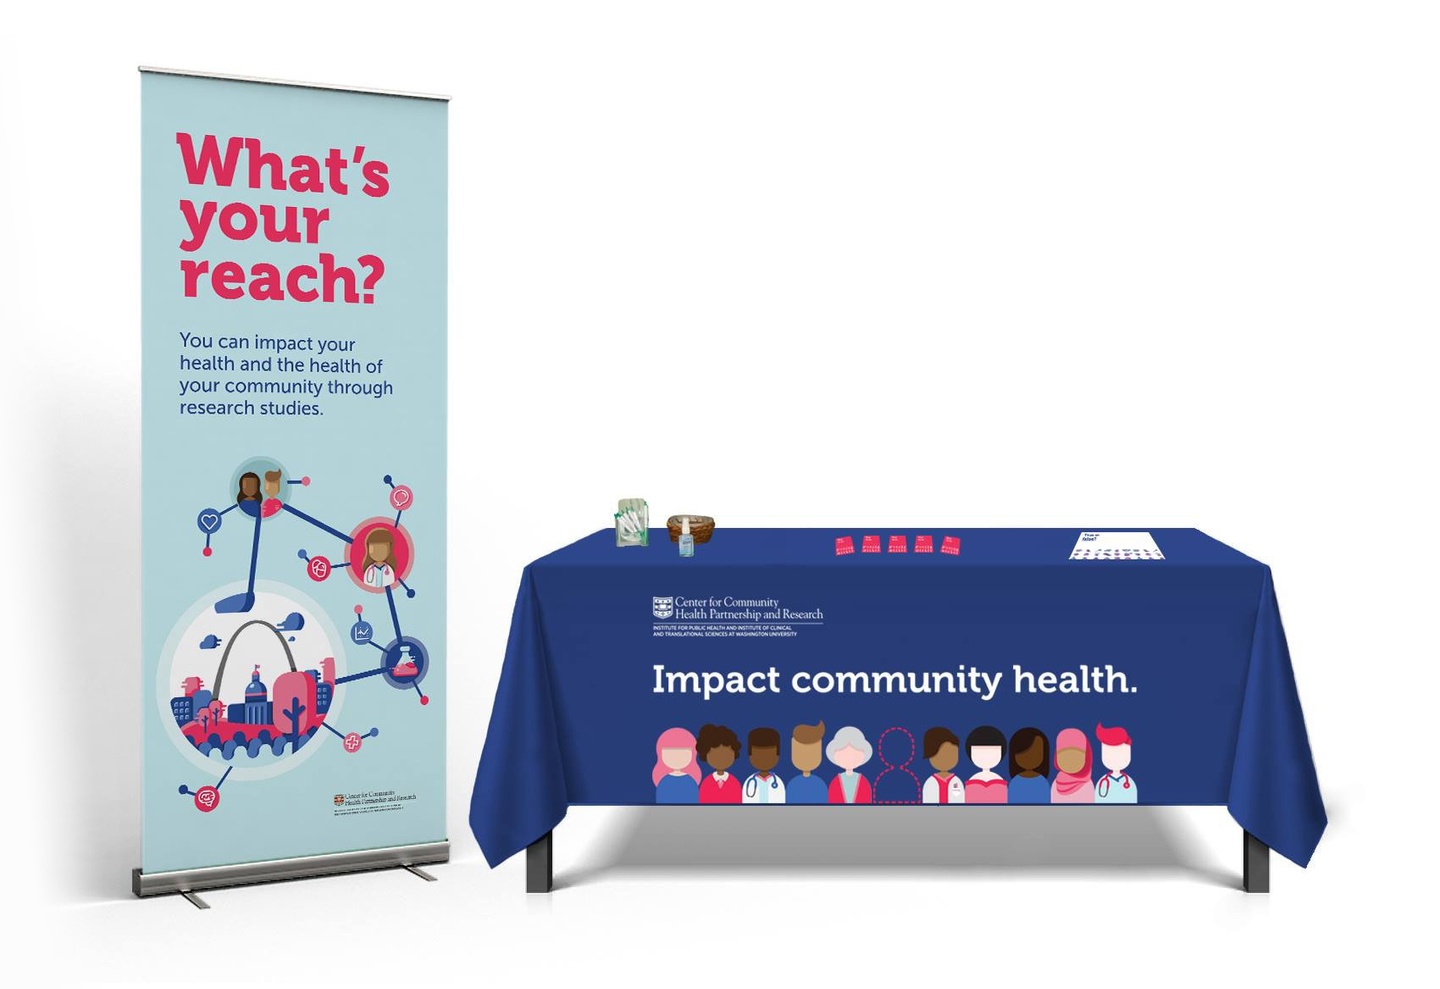 Rendering of banner and informational table. Banner in blues and pinks with pink text: What's your reach? and smaller blue text: You can impact your health and the health of your community through research studies. Icons show St. Louis skyline in a network with icons of a glass beaker, doctor, and two figures. Table cloth has text Impact community health. with icons of various diverse figures and medical professionals at the bottom. In the top left of the table cloth is a WashU logo.